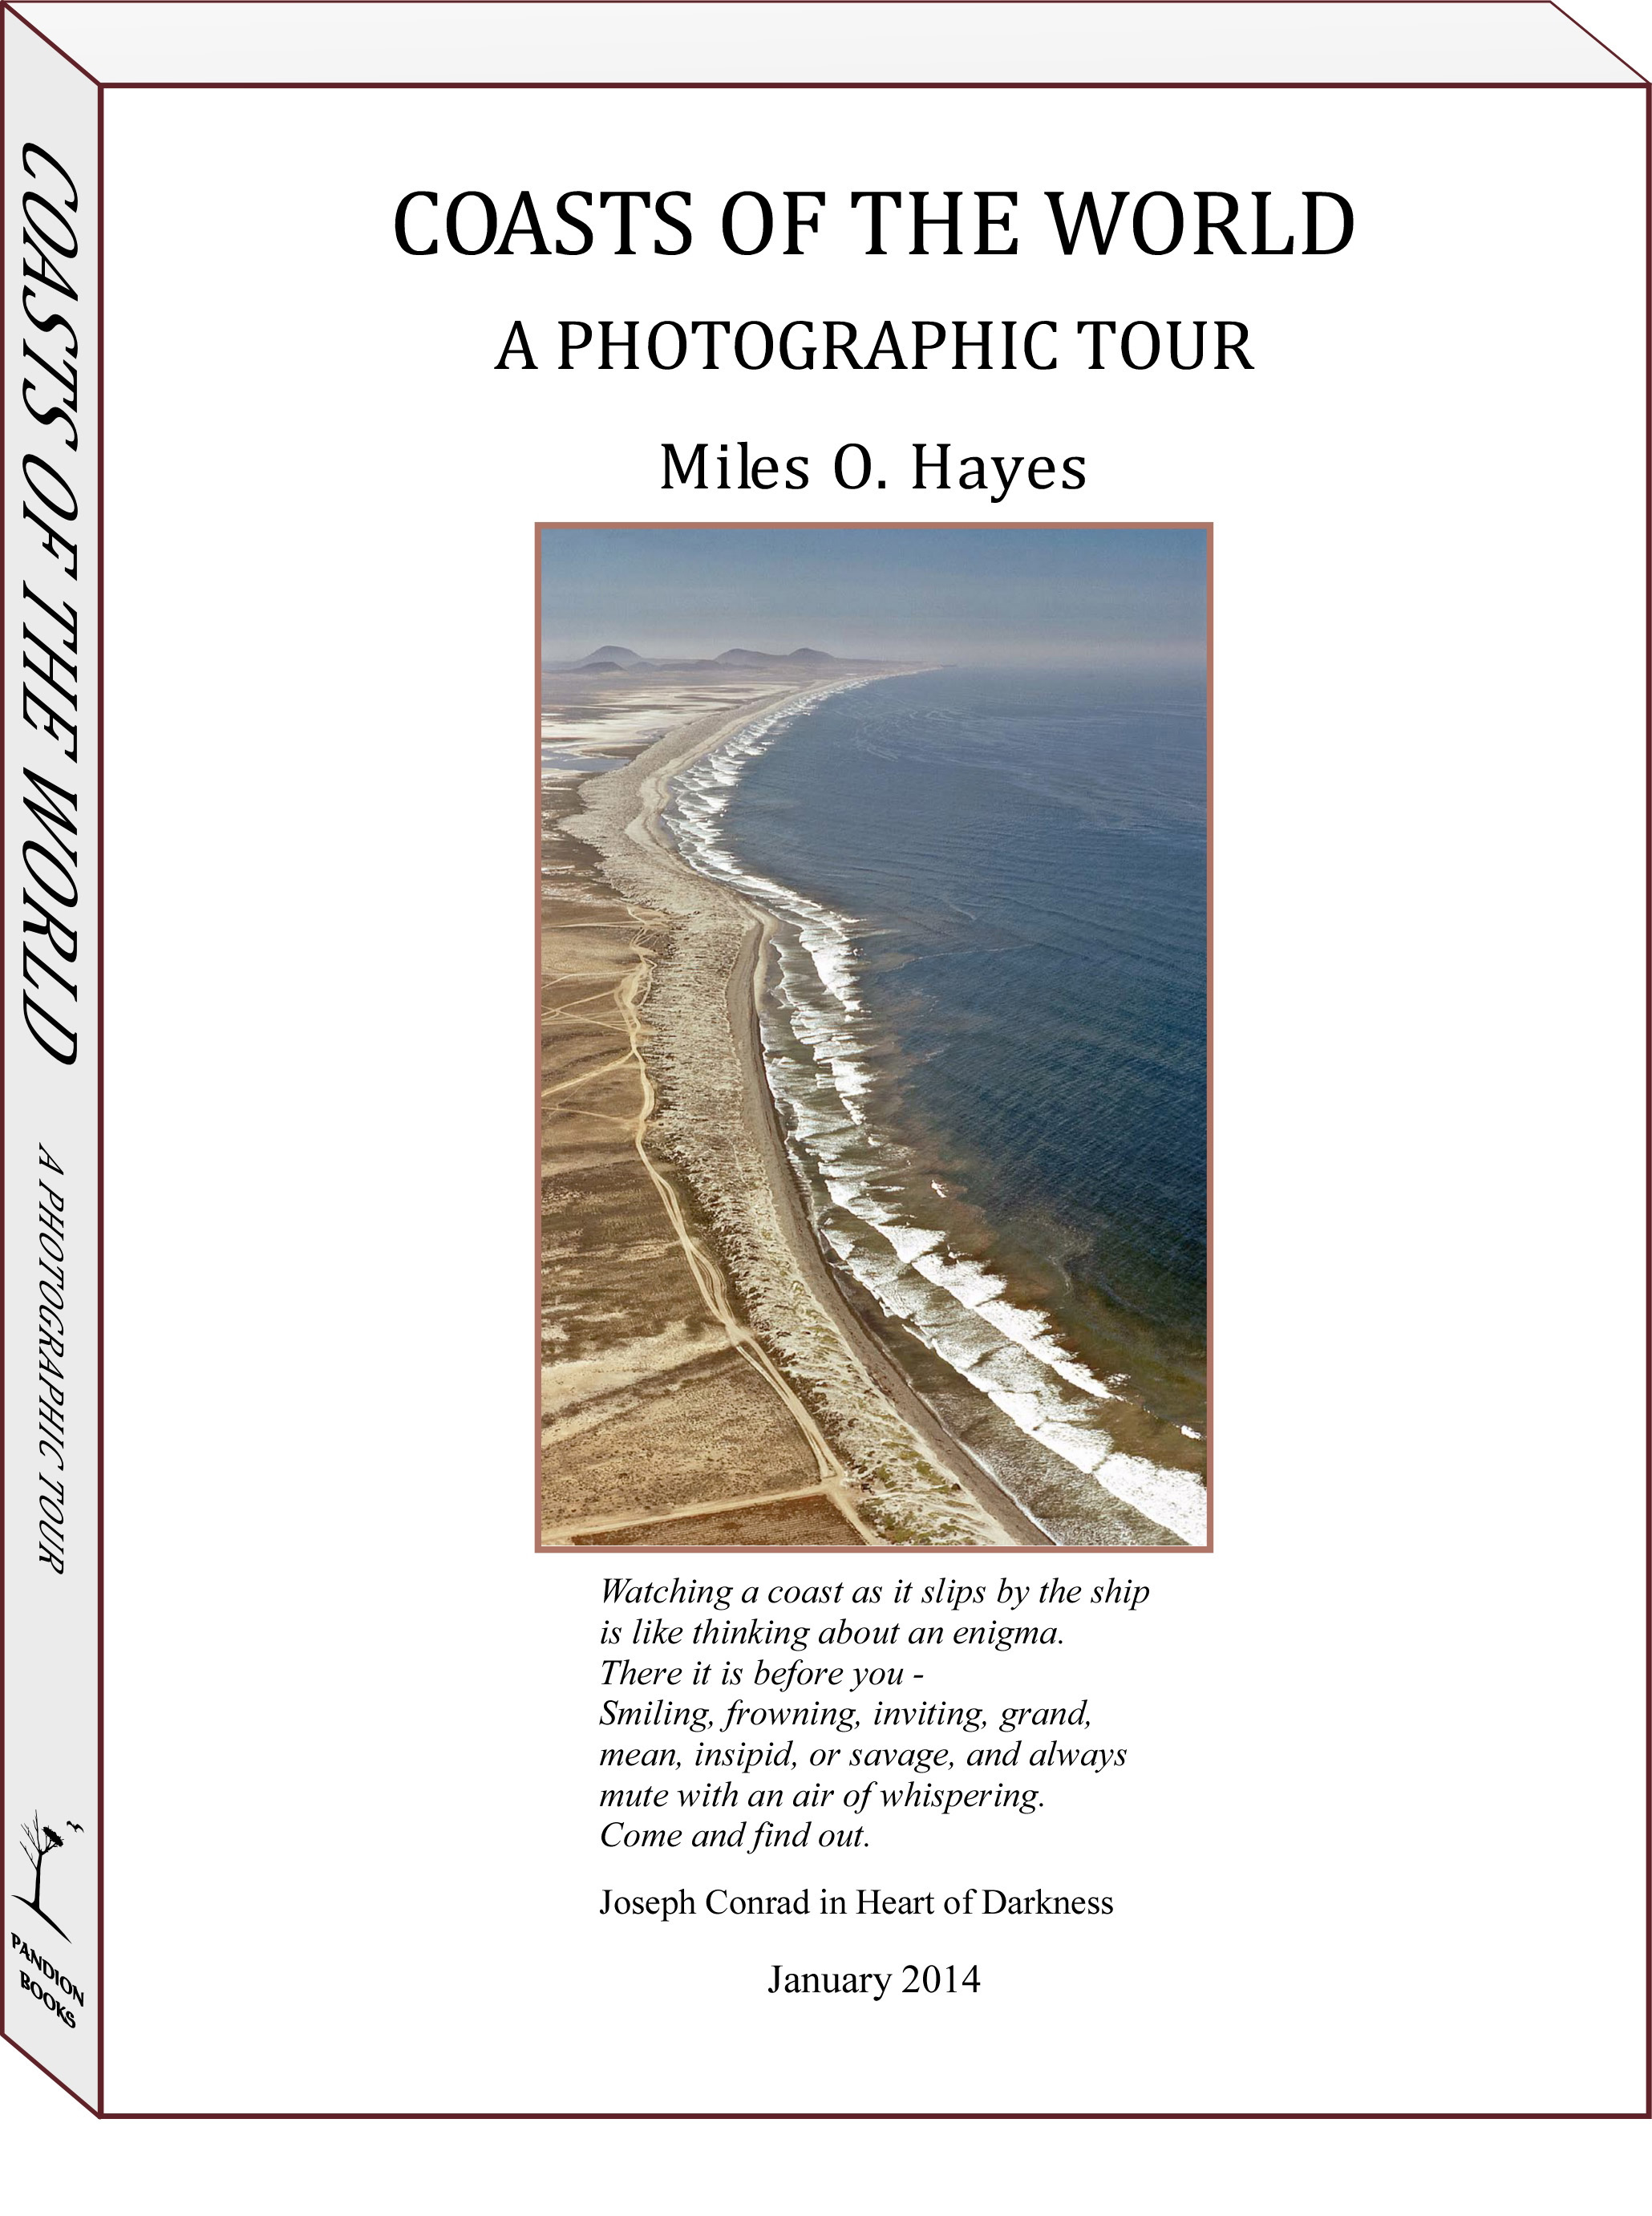 Coasts of the World - A Photographic Tour  (download here)